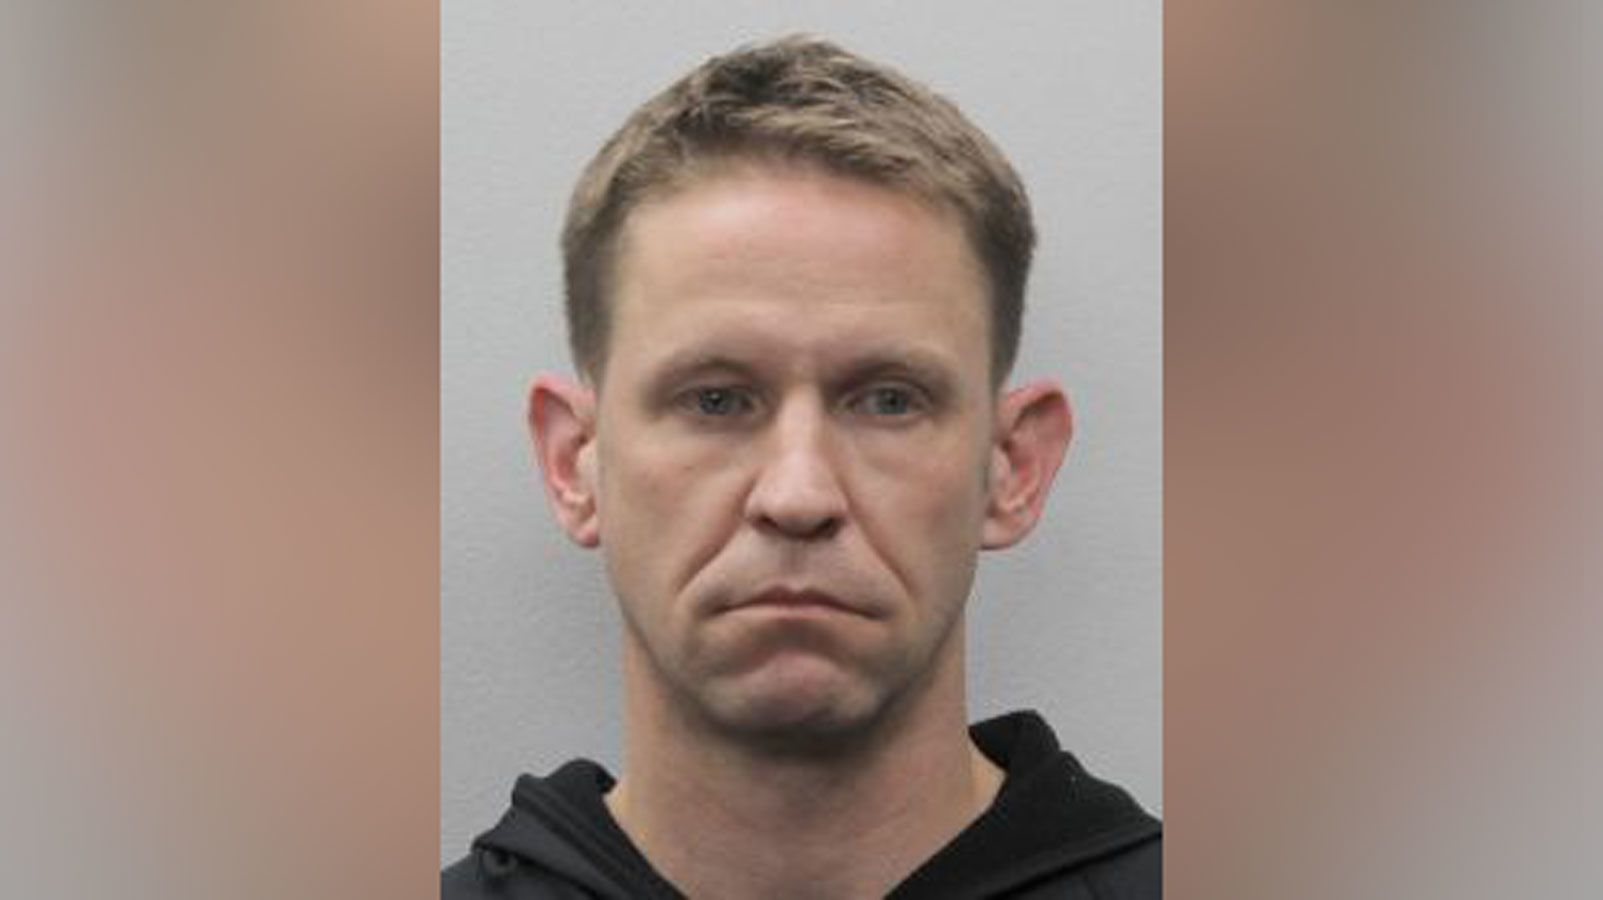 Sefon Ruxxx - Stefan Bieret: Assistant to House Sergeant-at-Arms charged with possession  of child pornography | CNN Politics